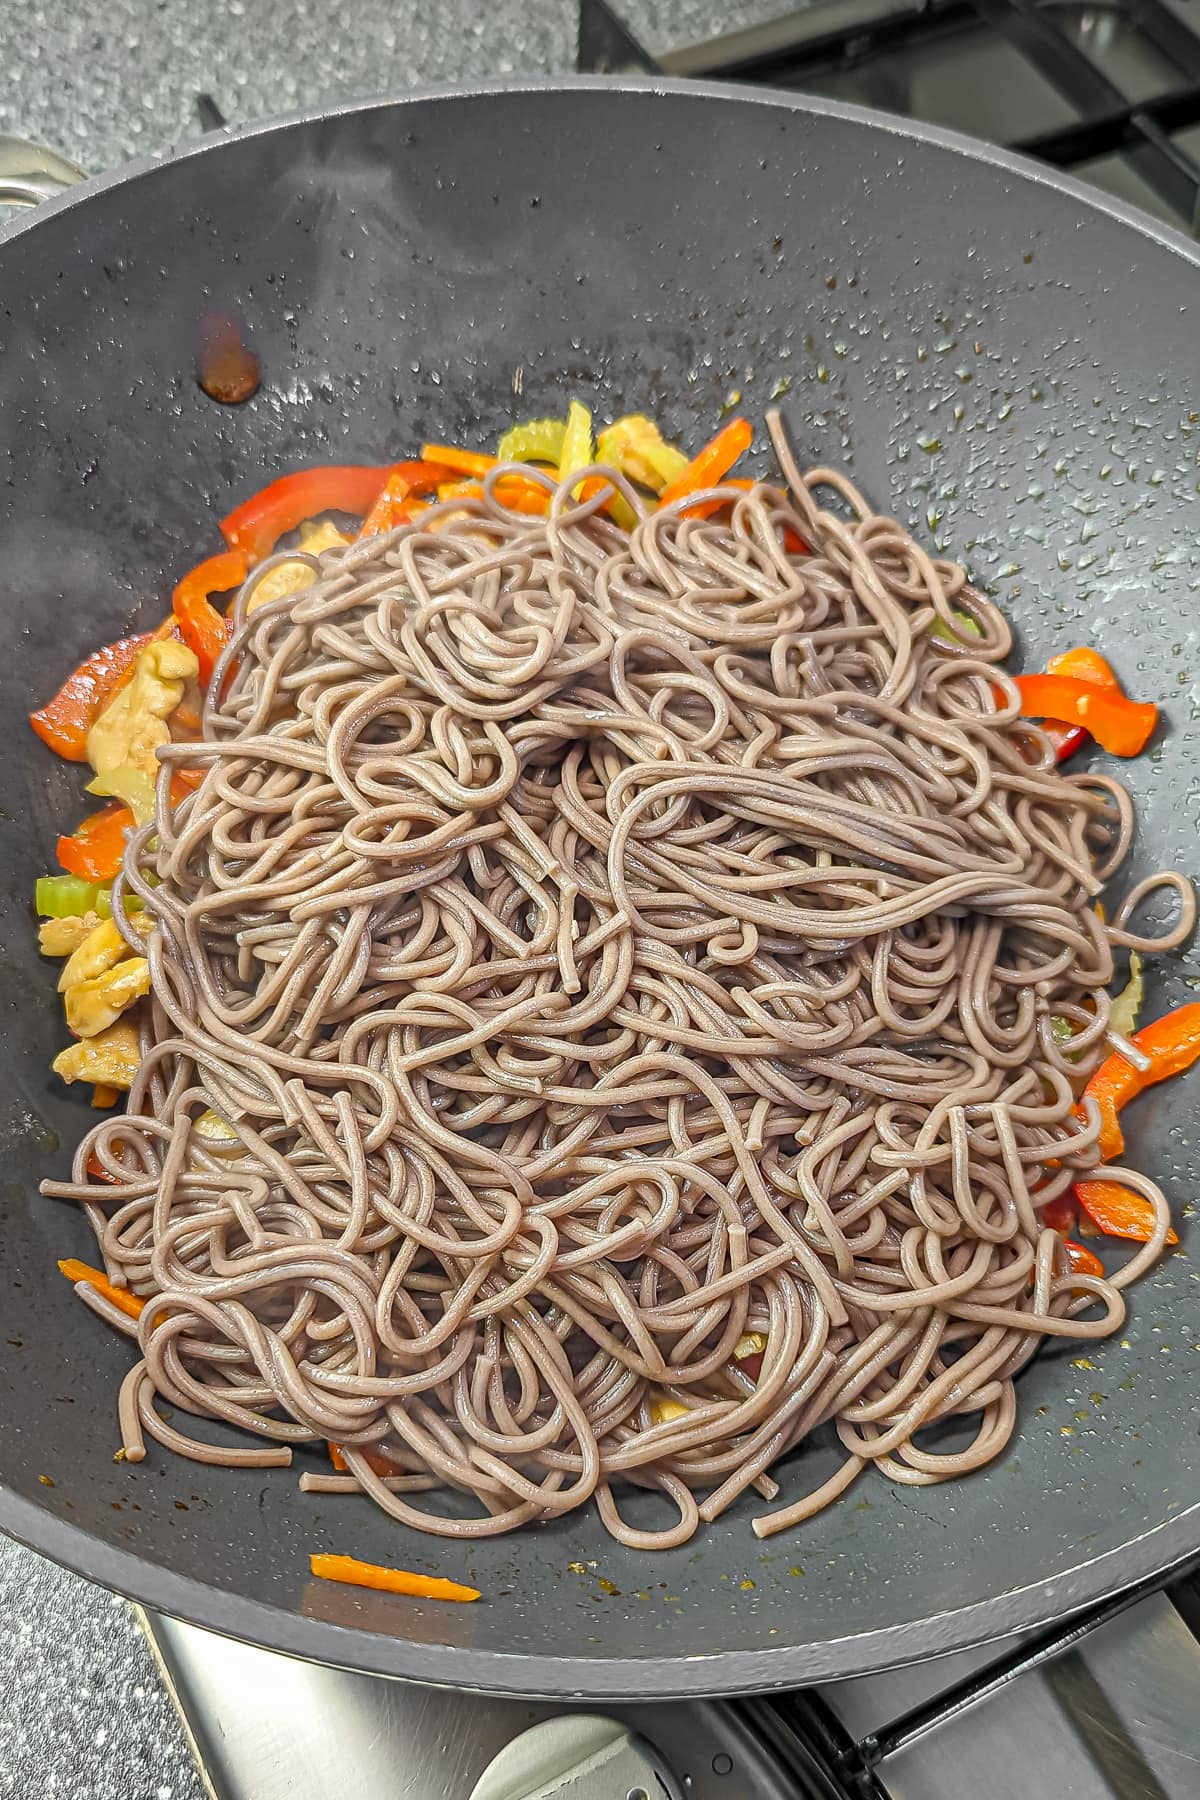 Soba noodles added to the stir-fry in the pan, mixing with the other ingredients.